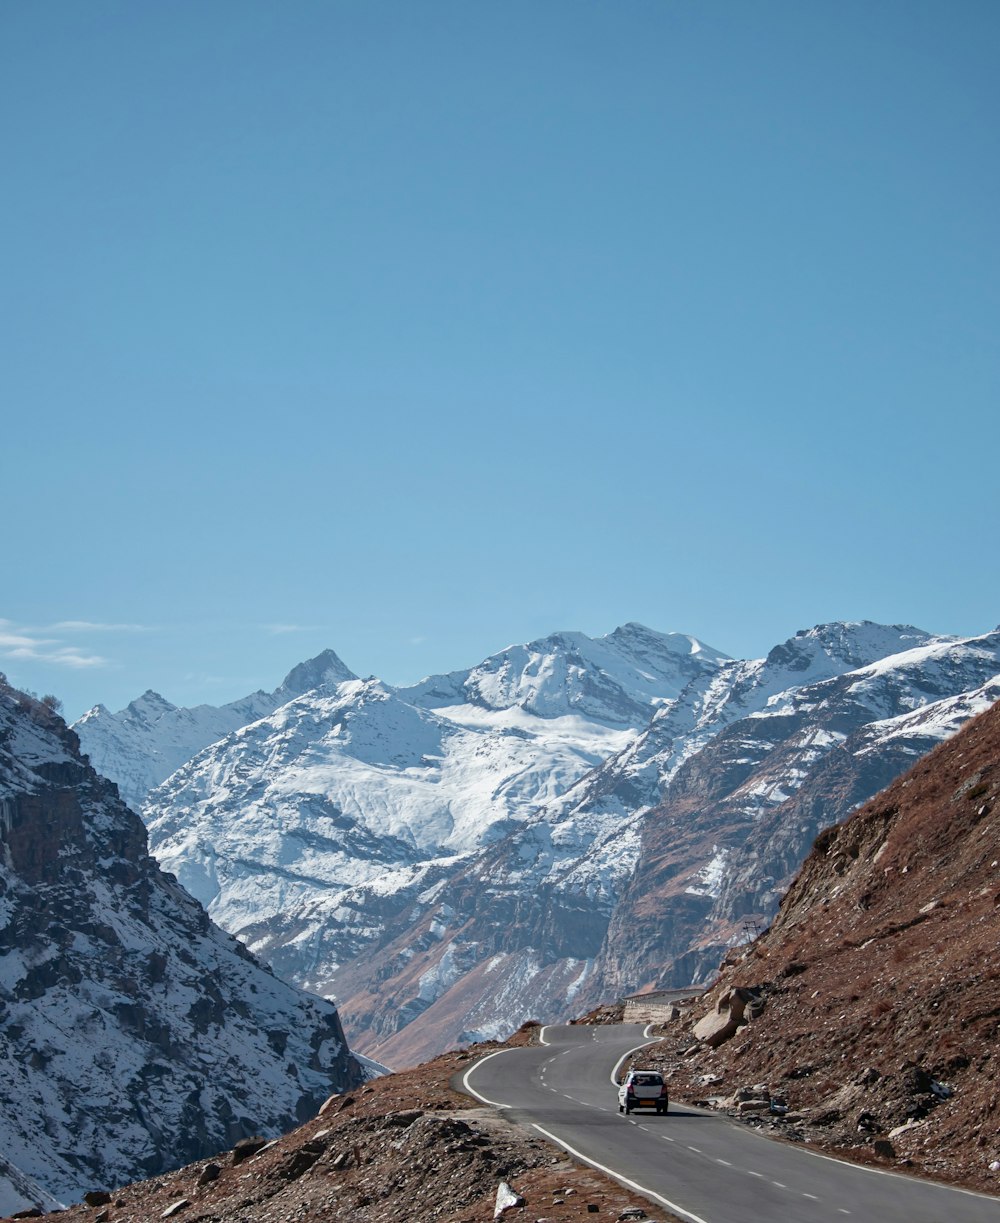 a car driving down a mountain road with snow covered mountains in the background